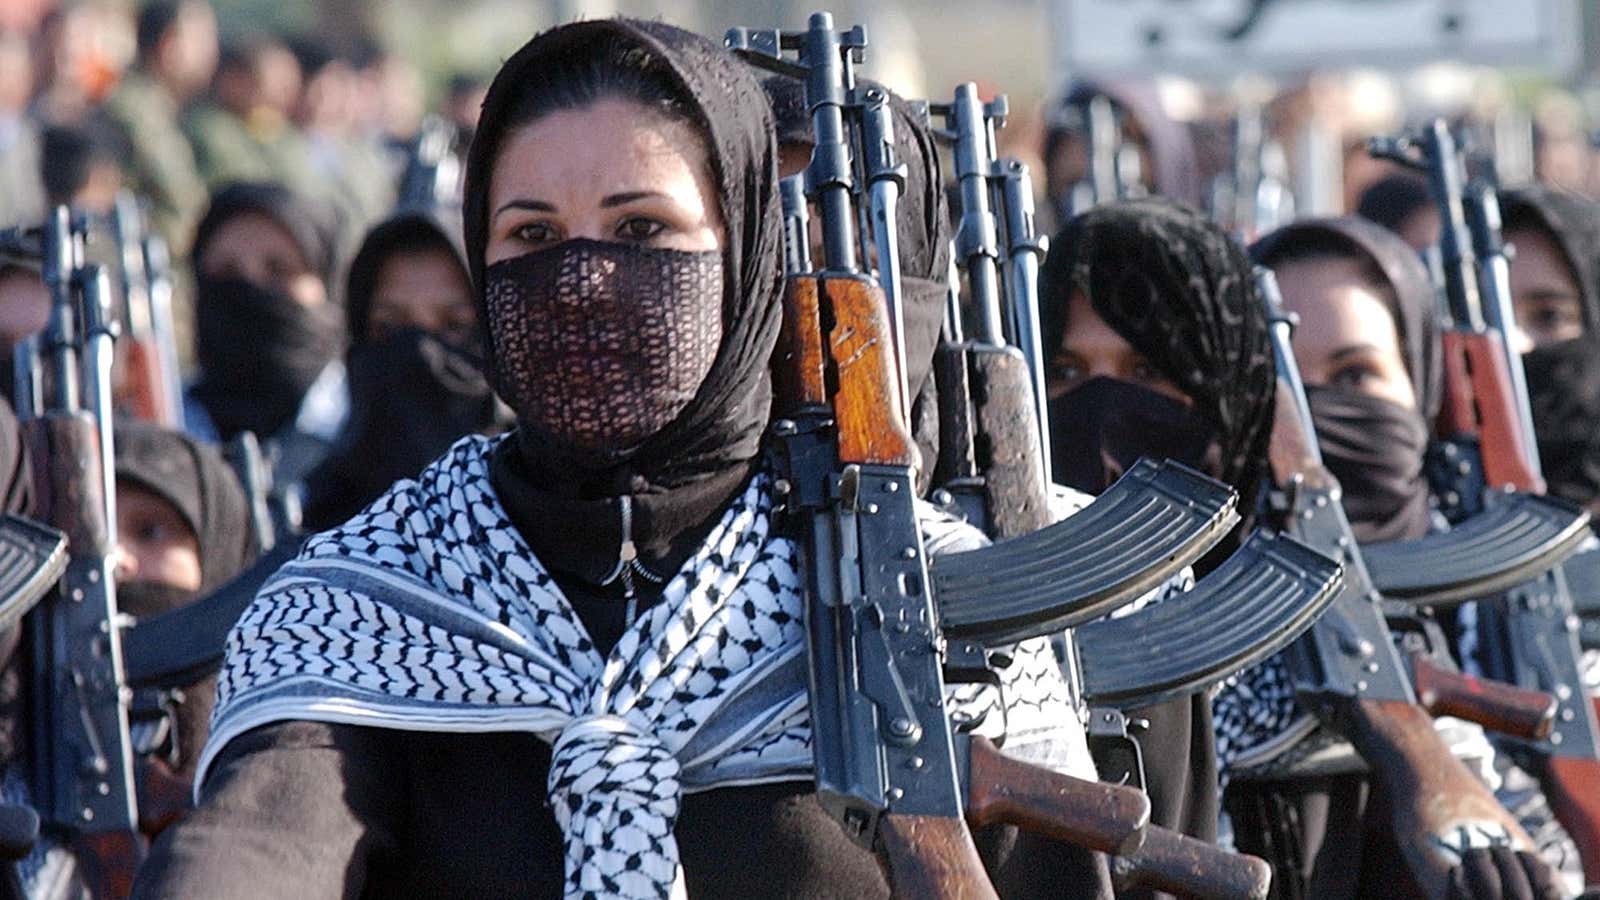 Iraqi women hold AK-47 assault rifles and march during a military parade in Diala province, northeast of Baghdad, Iraq on Jan. 7, 2003.